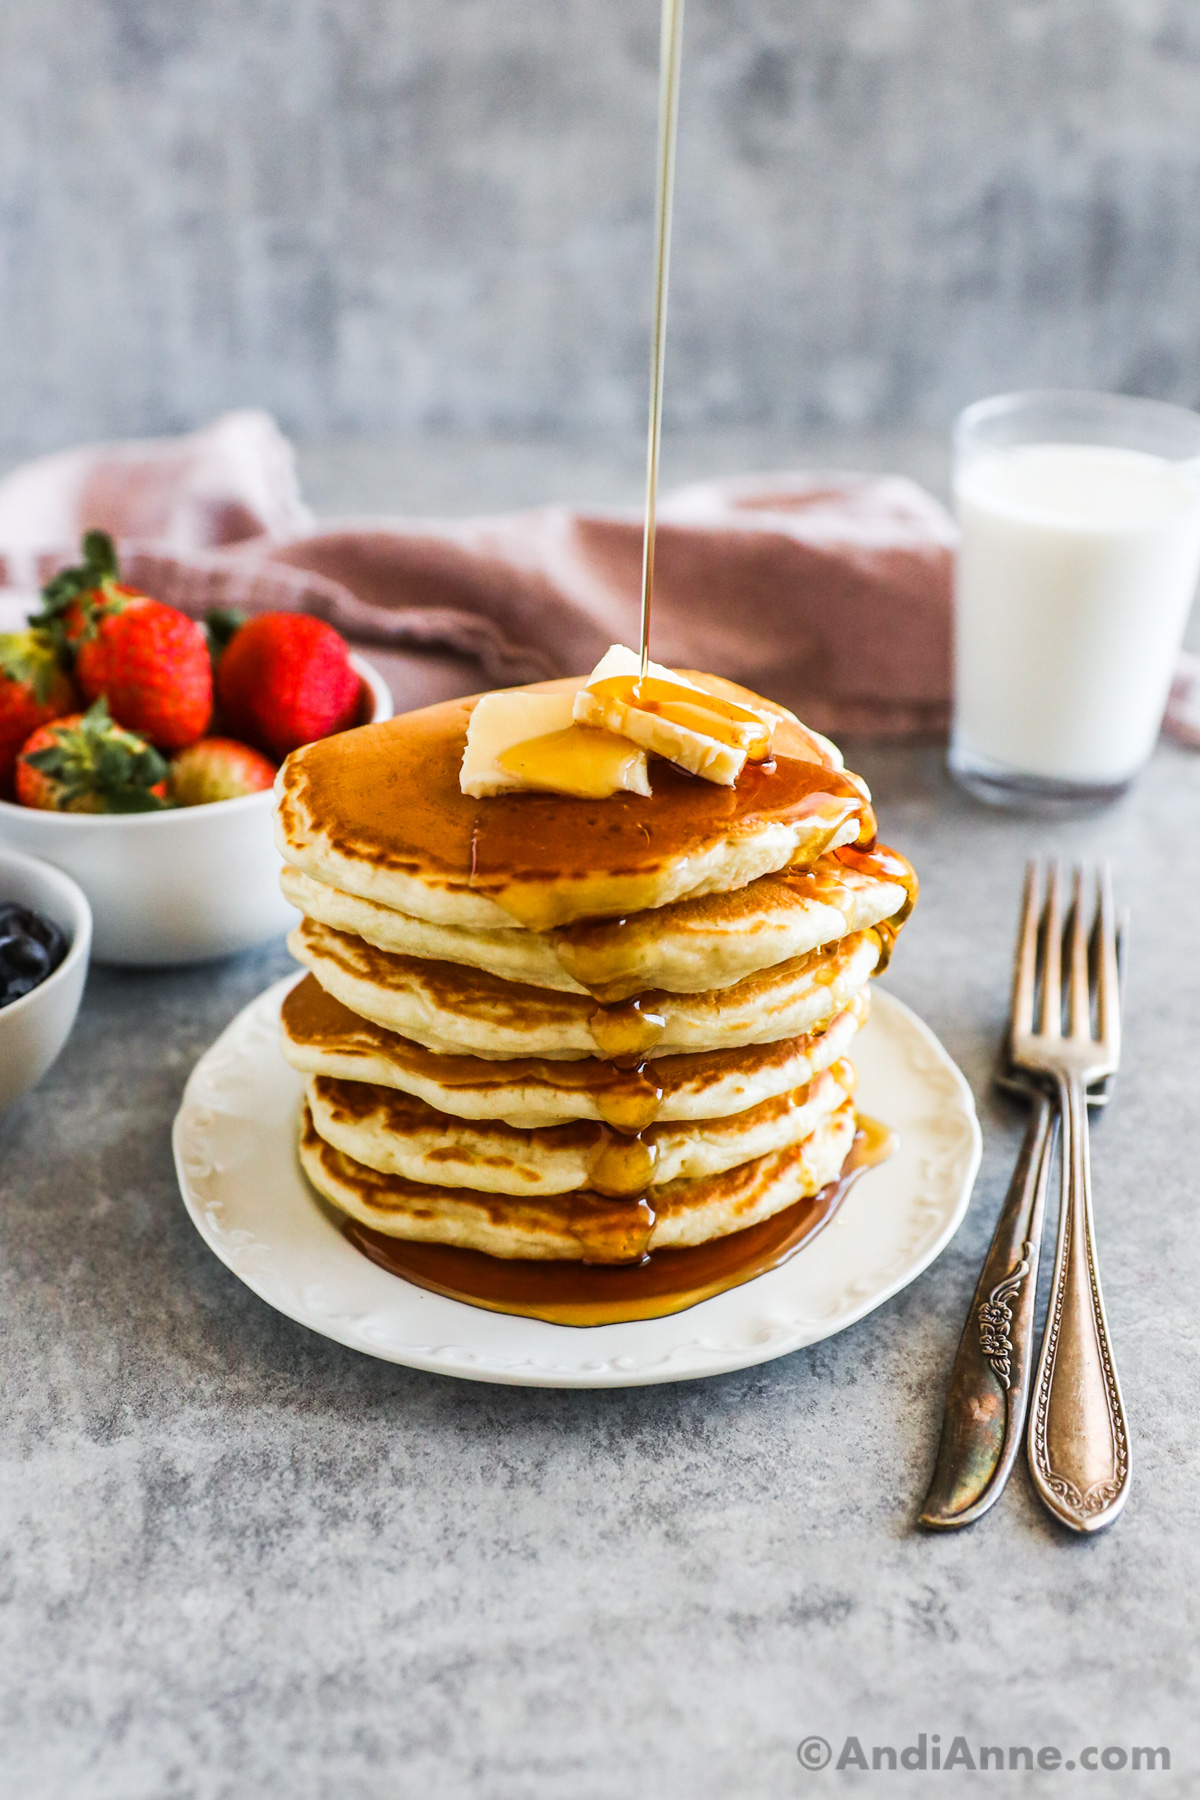 A stack of fluffy pancakes on a white plate with butter and maple syrup. Forks, a glass of milk, a bowl of strawberries in the background.